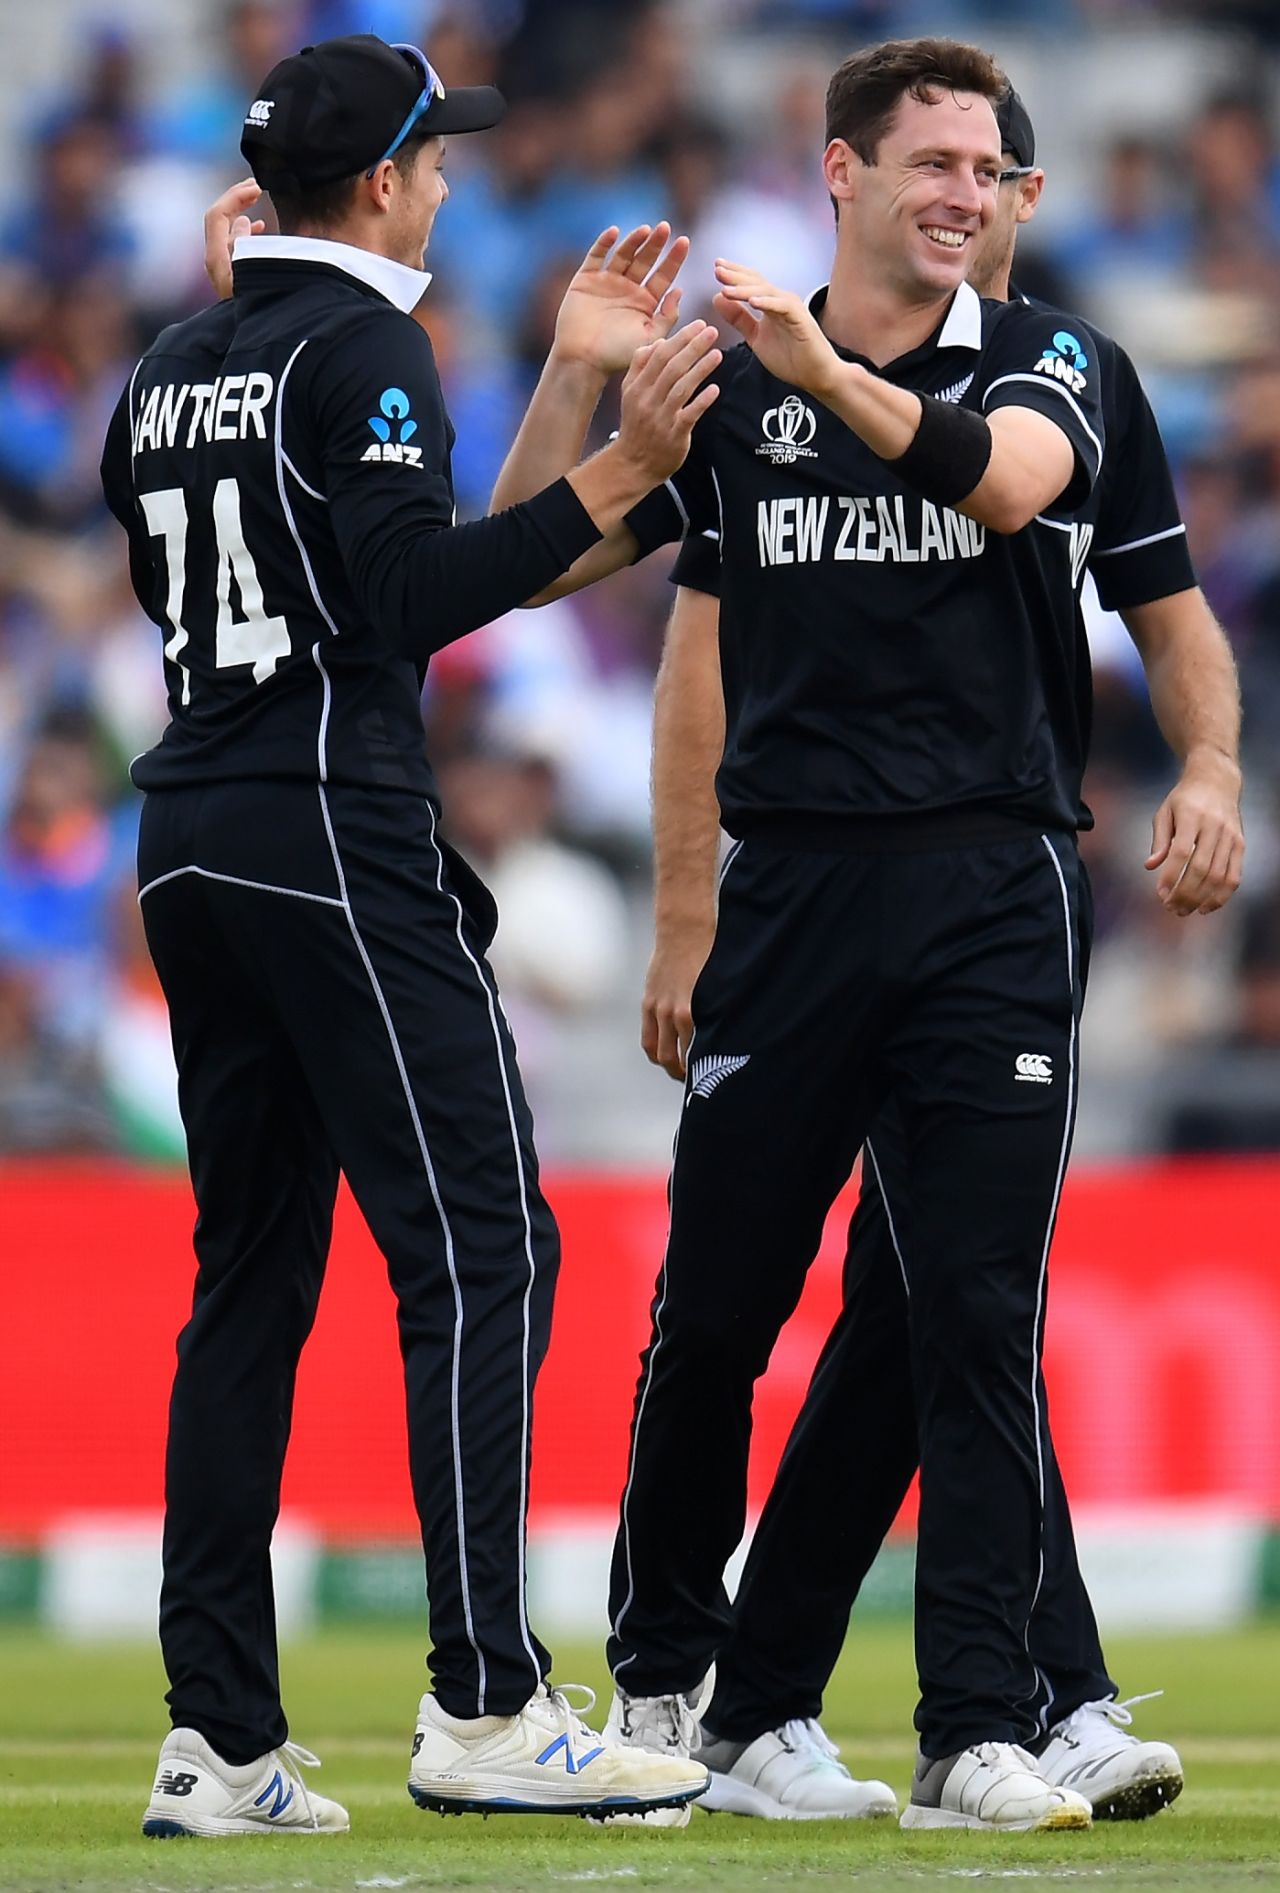 Matt Henry celebrates the wicket of KL Rahul, keeping New Zealand to 239, India v New Zealand, World Cup 2019, Old Trafford, July 10, 2019